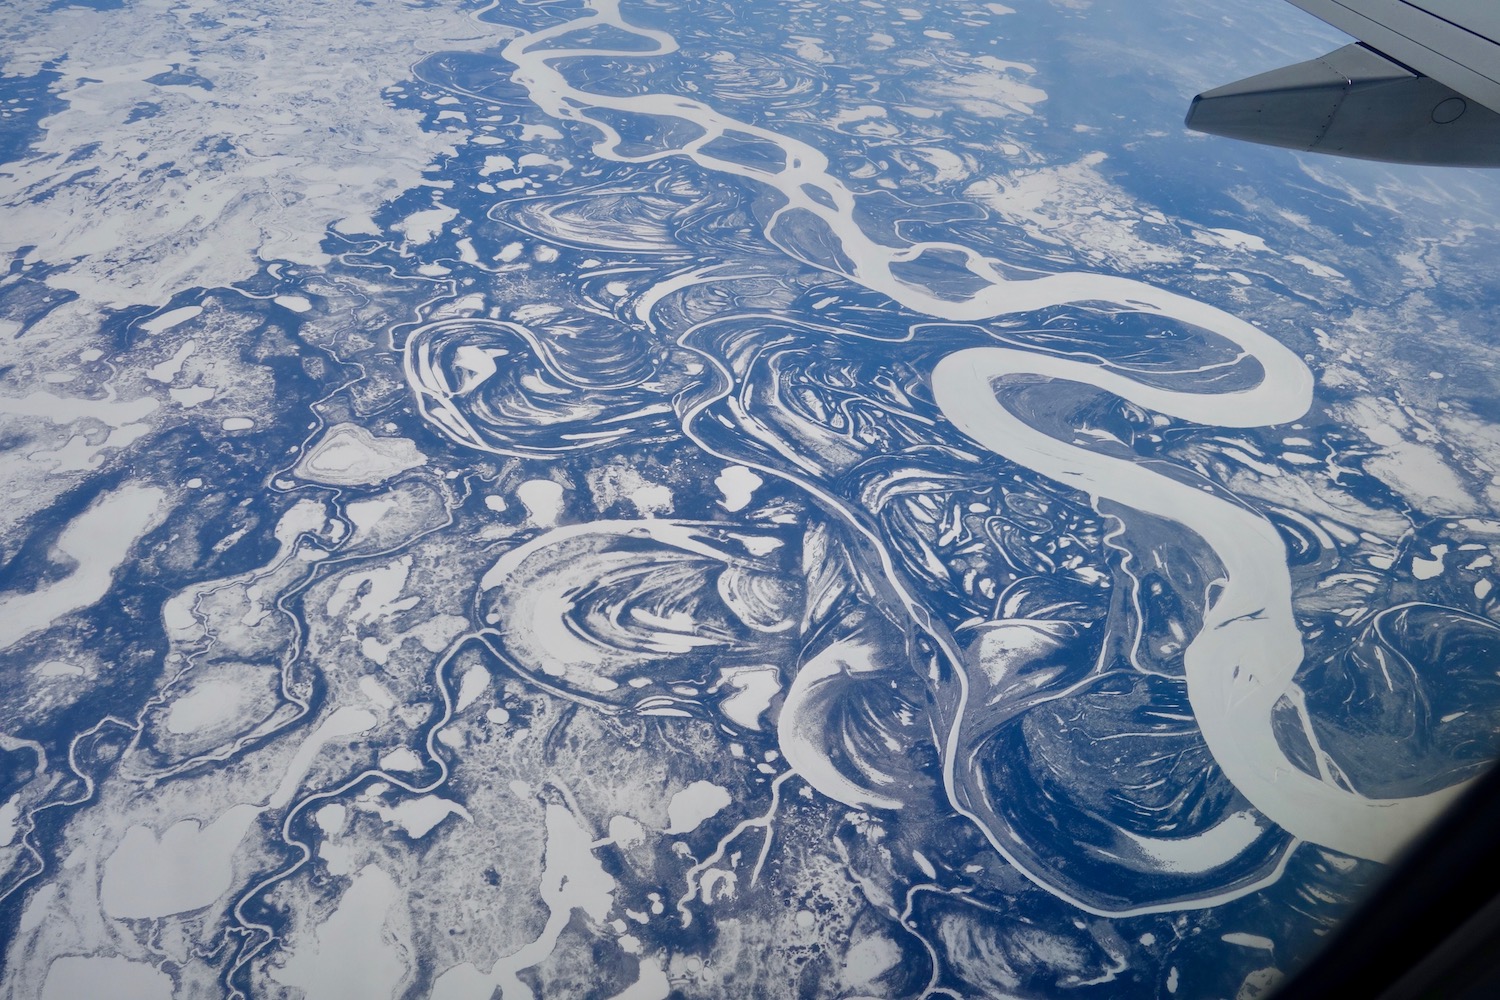 A large frozen river covered with snow meanders through a flatland sprinkled with oxbow lakes and smaller streams and rivers in this photo taken from a jet aircraft.